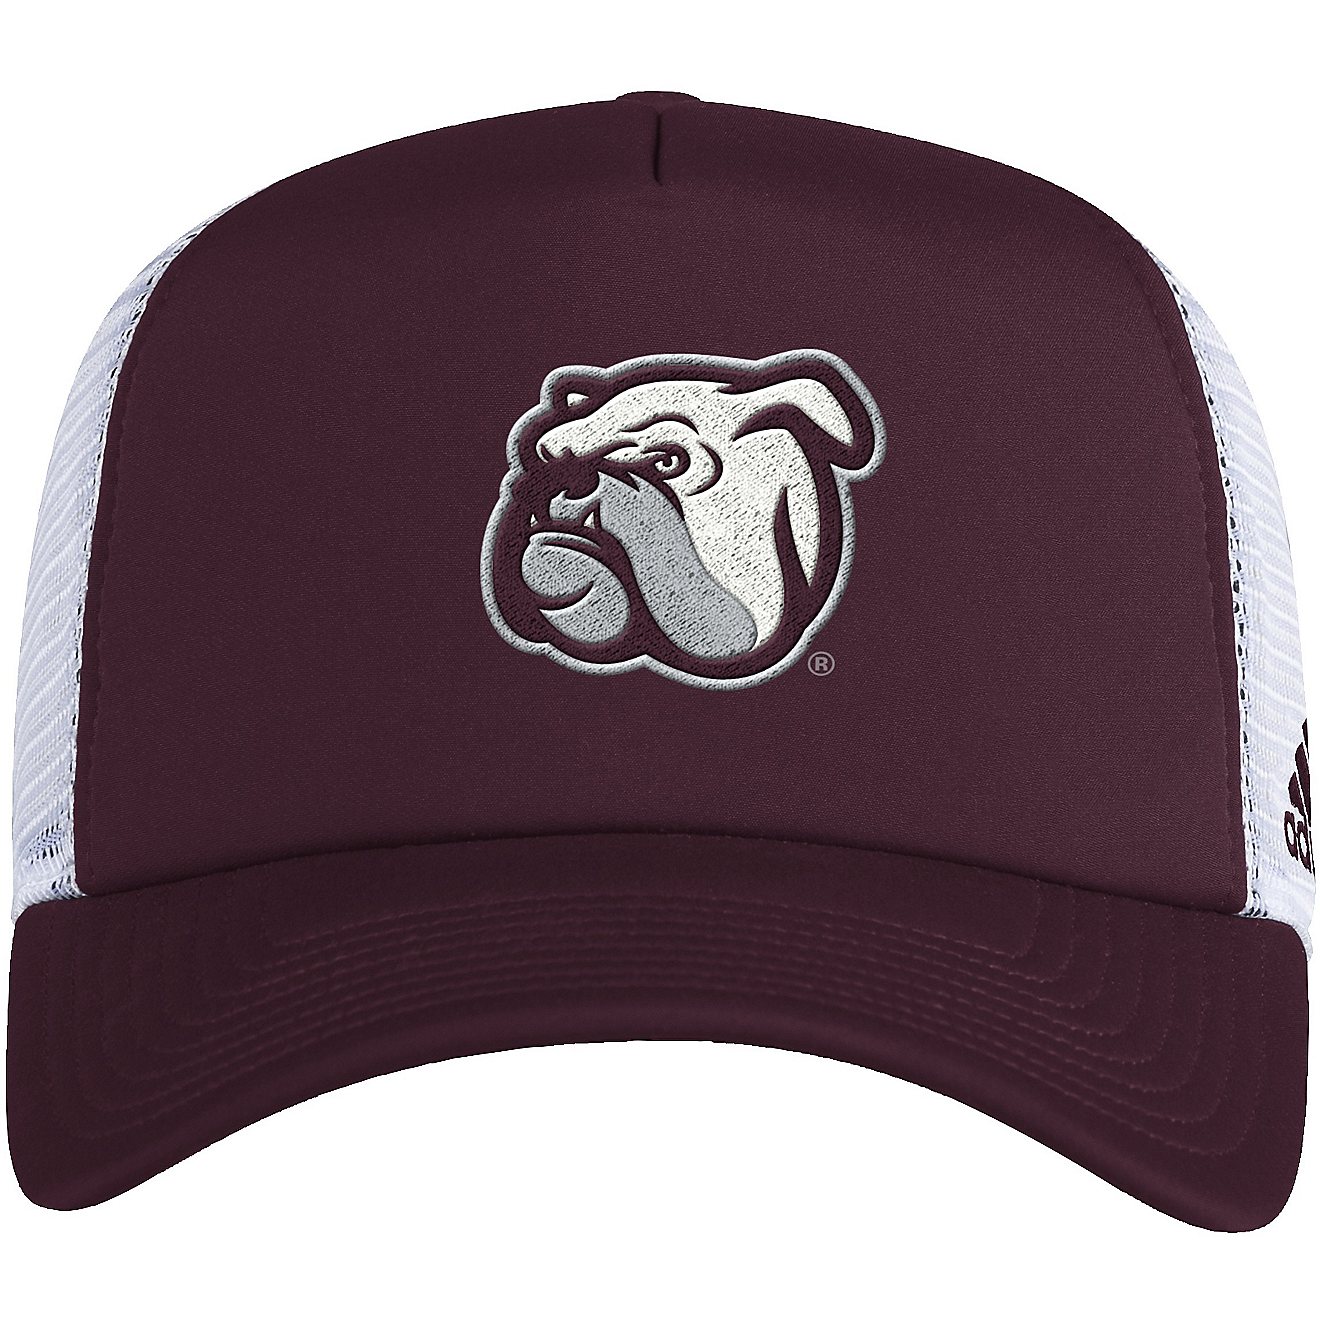 adidas Adults’ Mississippi State University Foam Trucker Cap                                                                   - view number 1